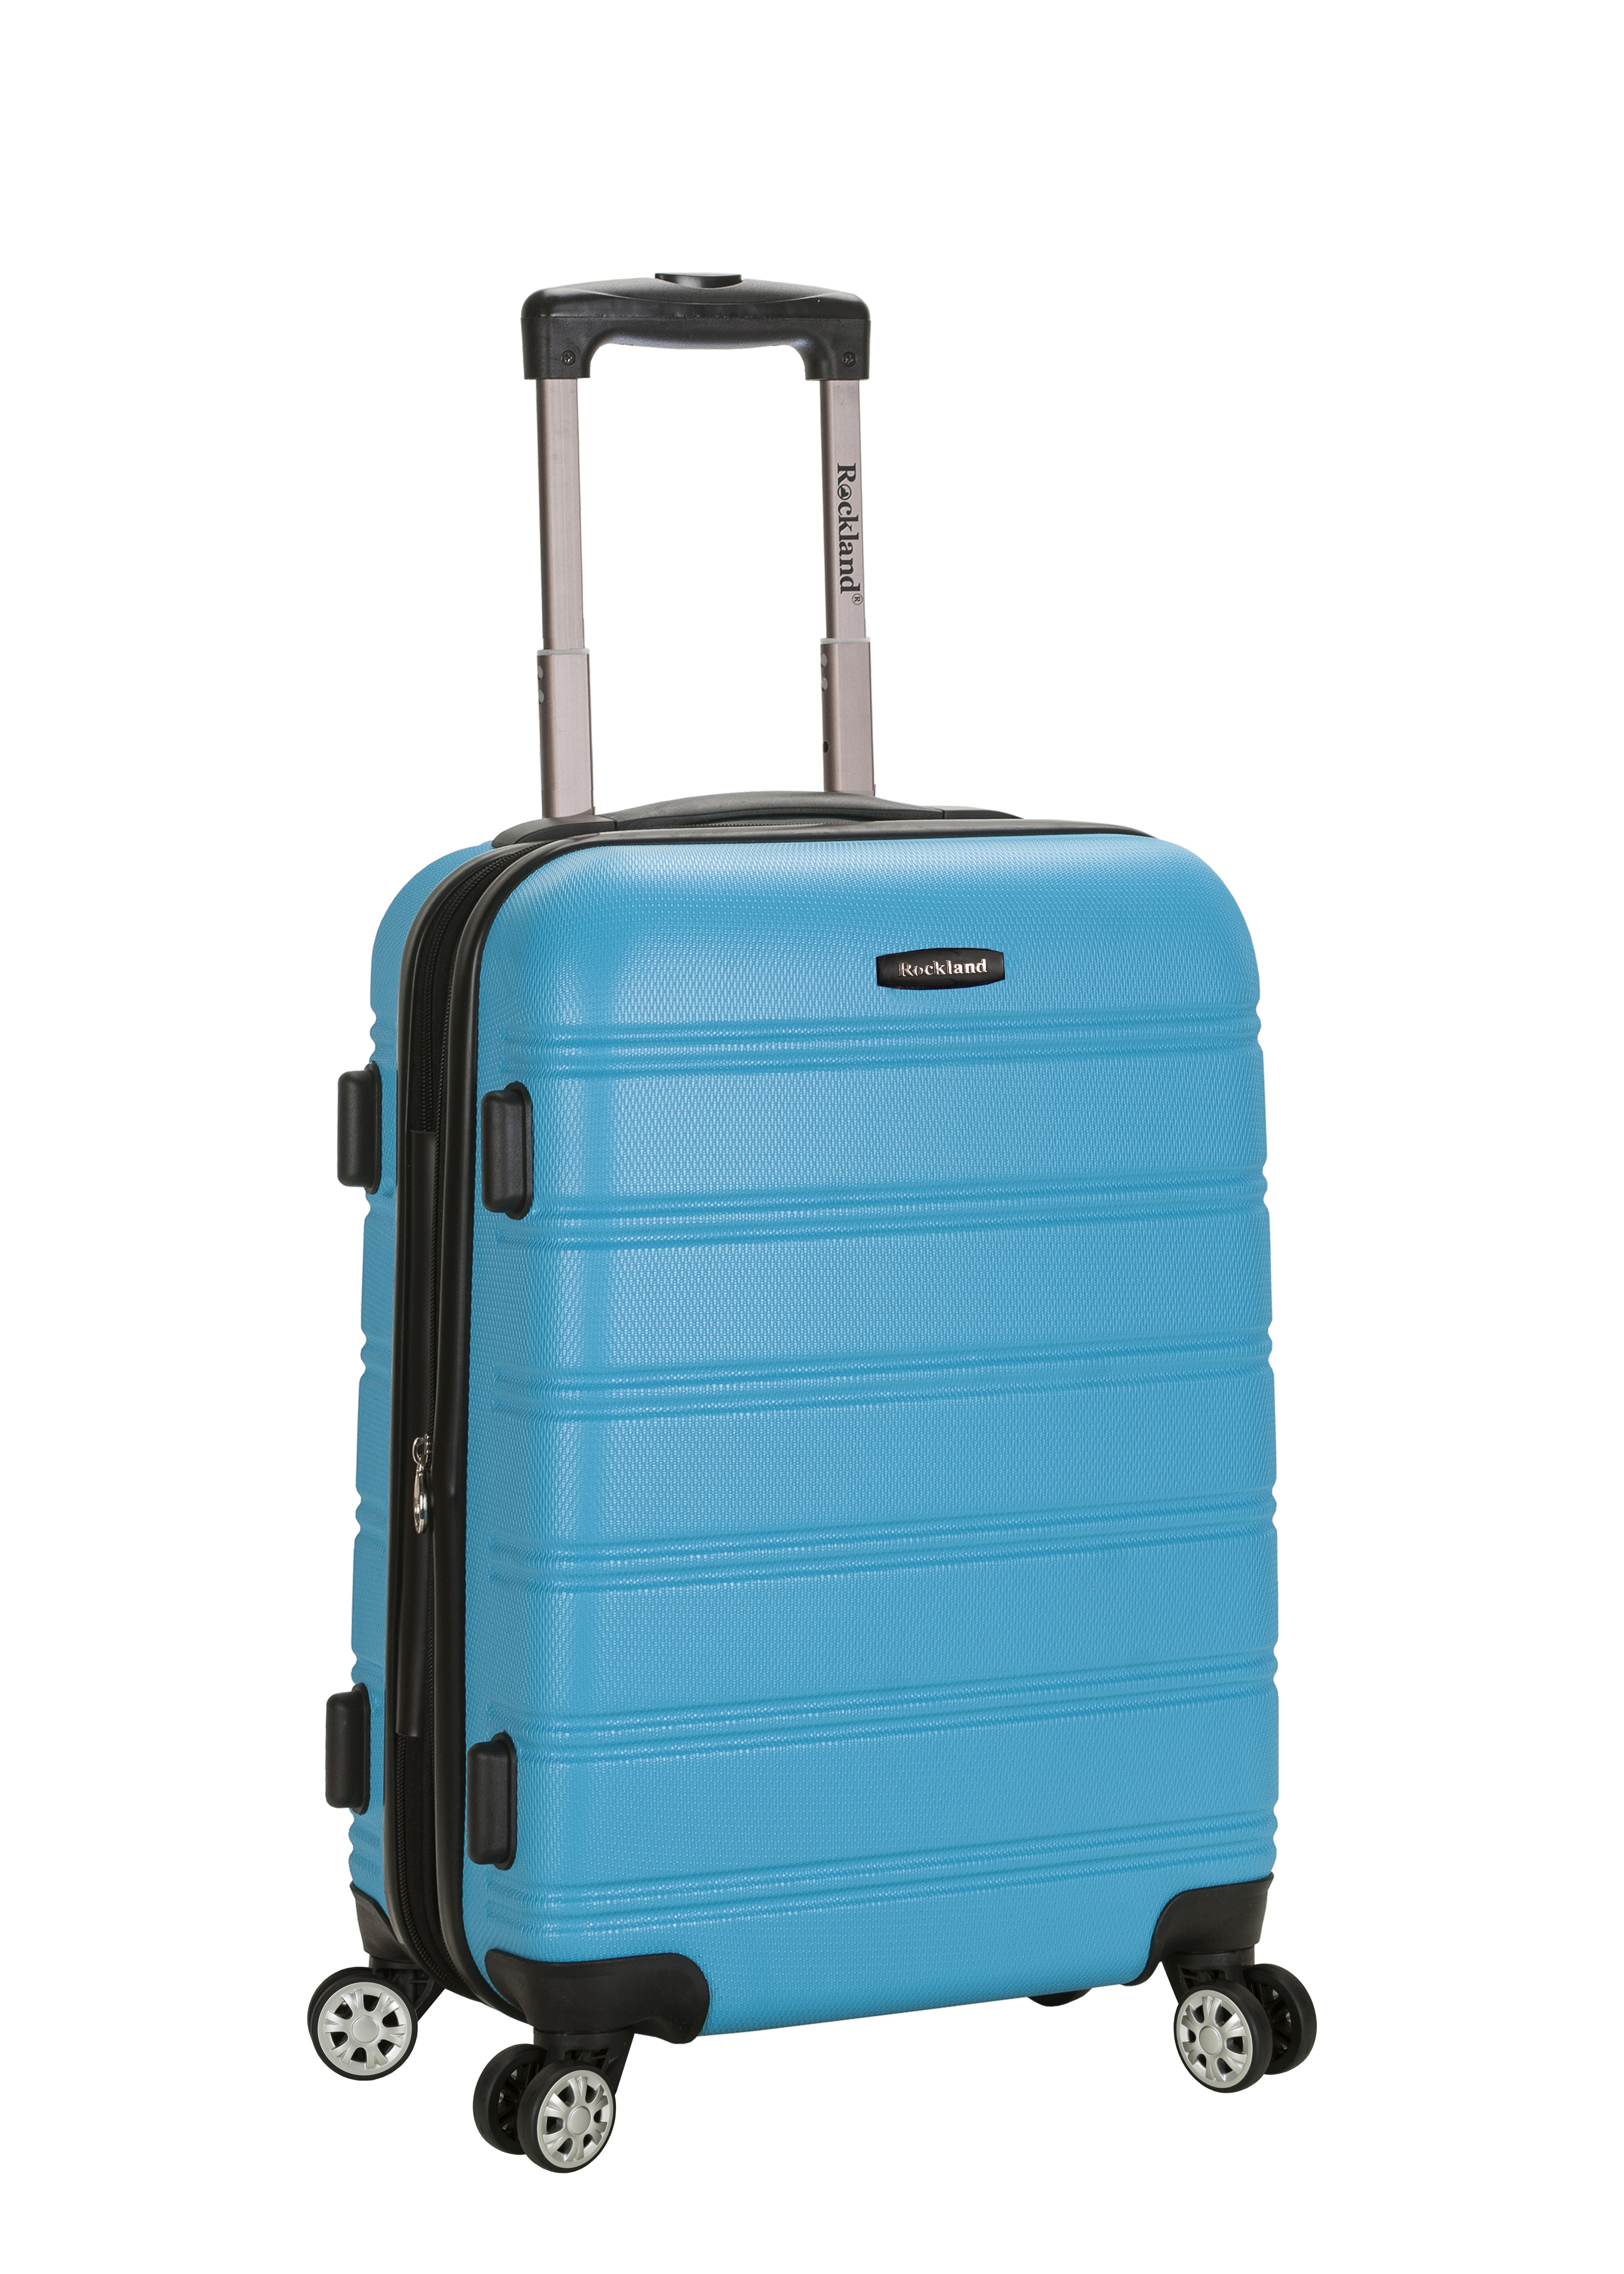 Rockland Luggage F145 Melbourne 20 in. Expandable ABS Carry On Luggage - image 1 of 4